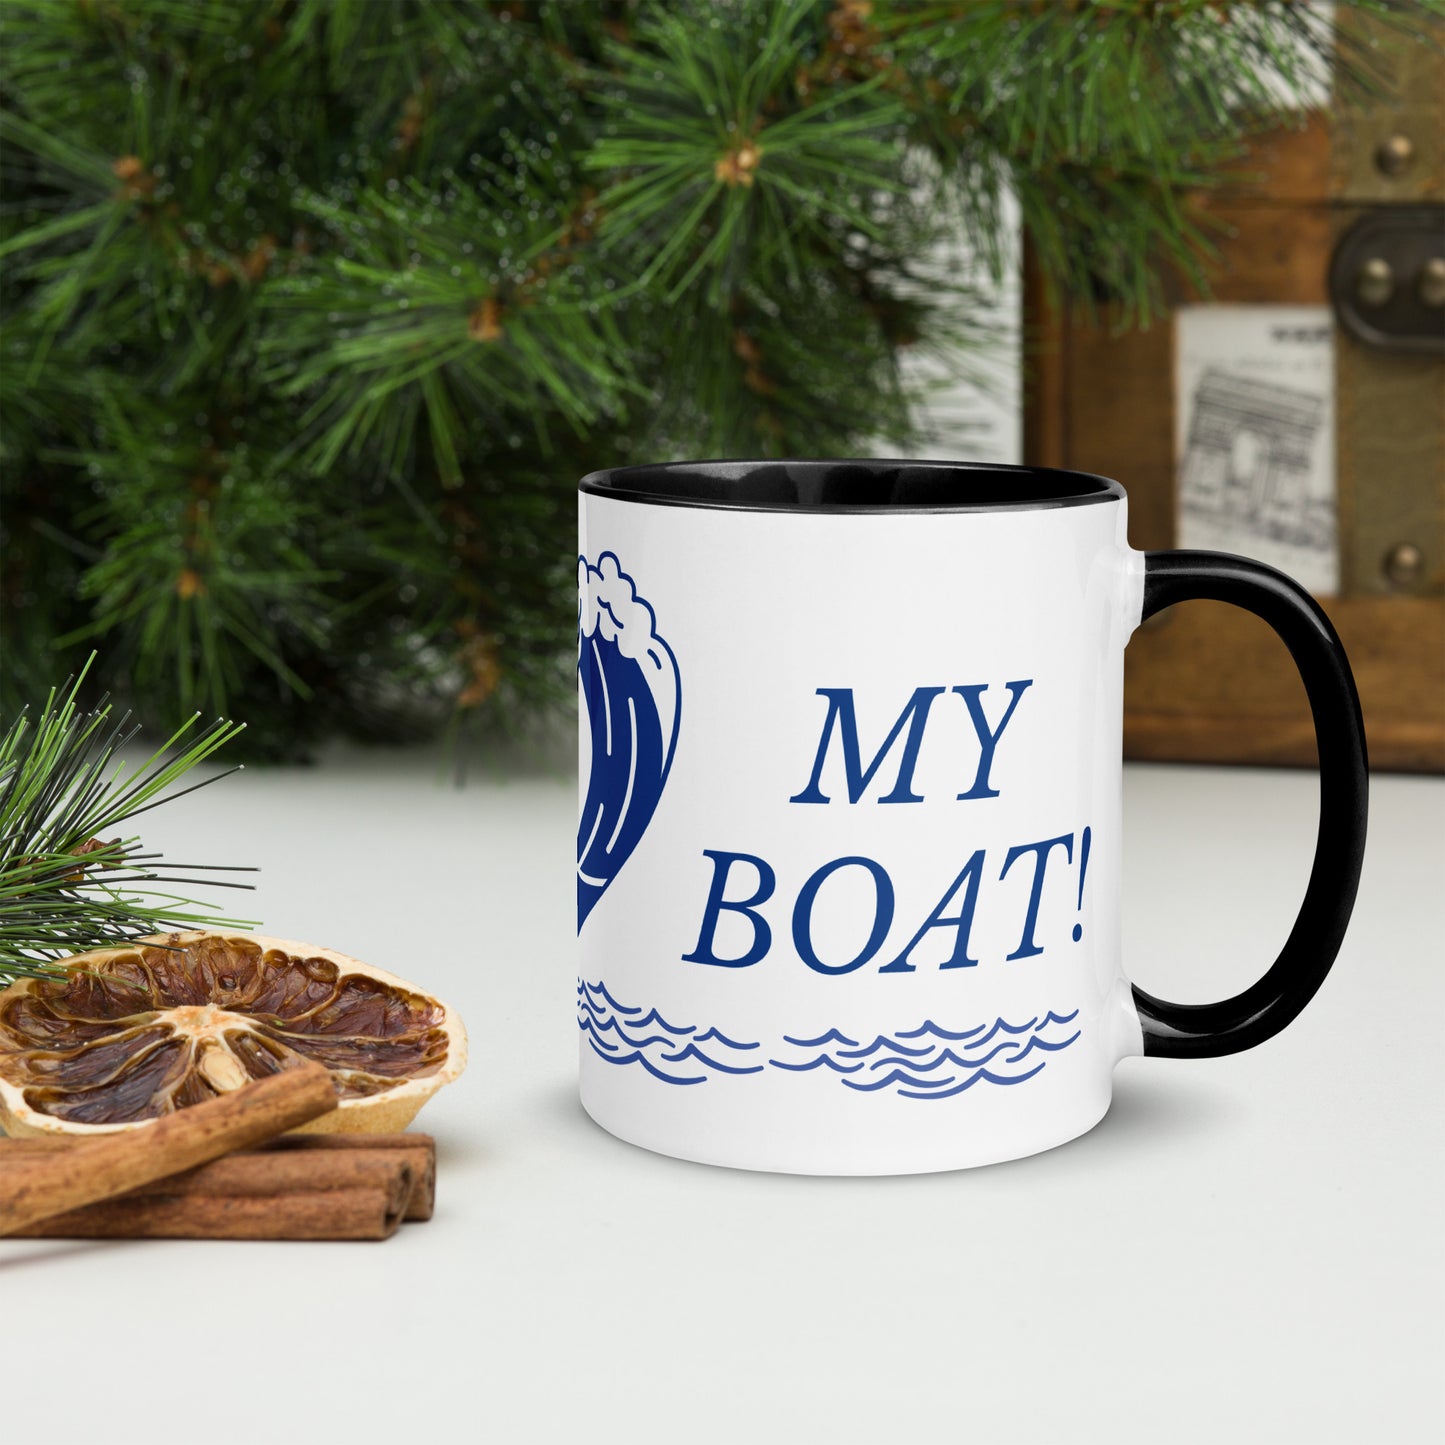 I Love My Boat Mug with Colour Inside by Our BoatyVerse